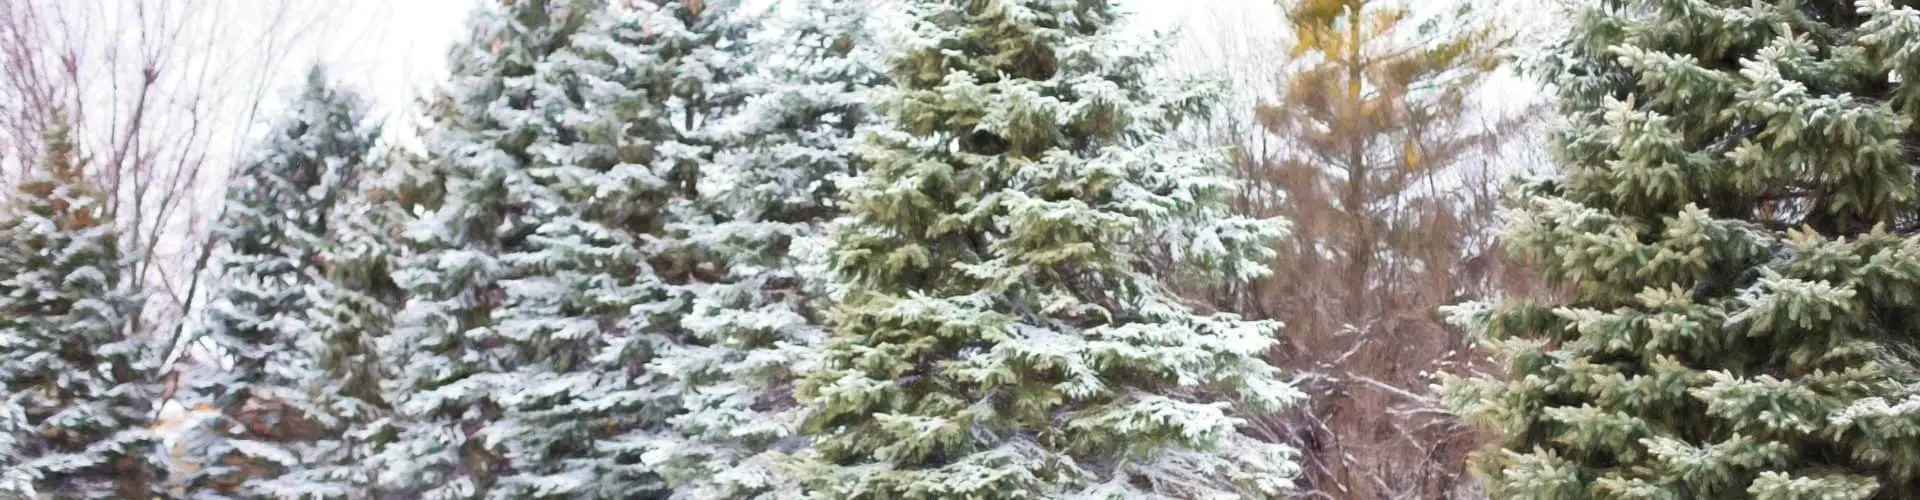 How to Plant a Live Christmas Tree Blog Article Image